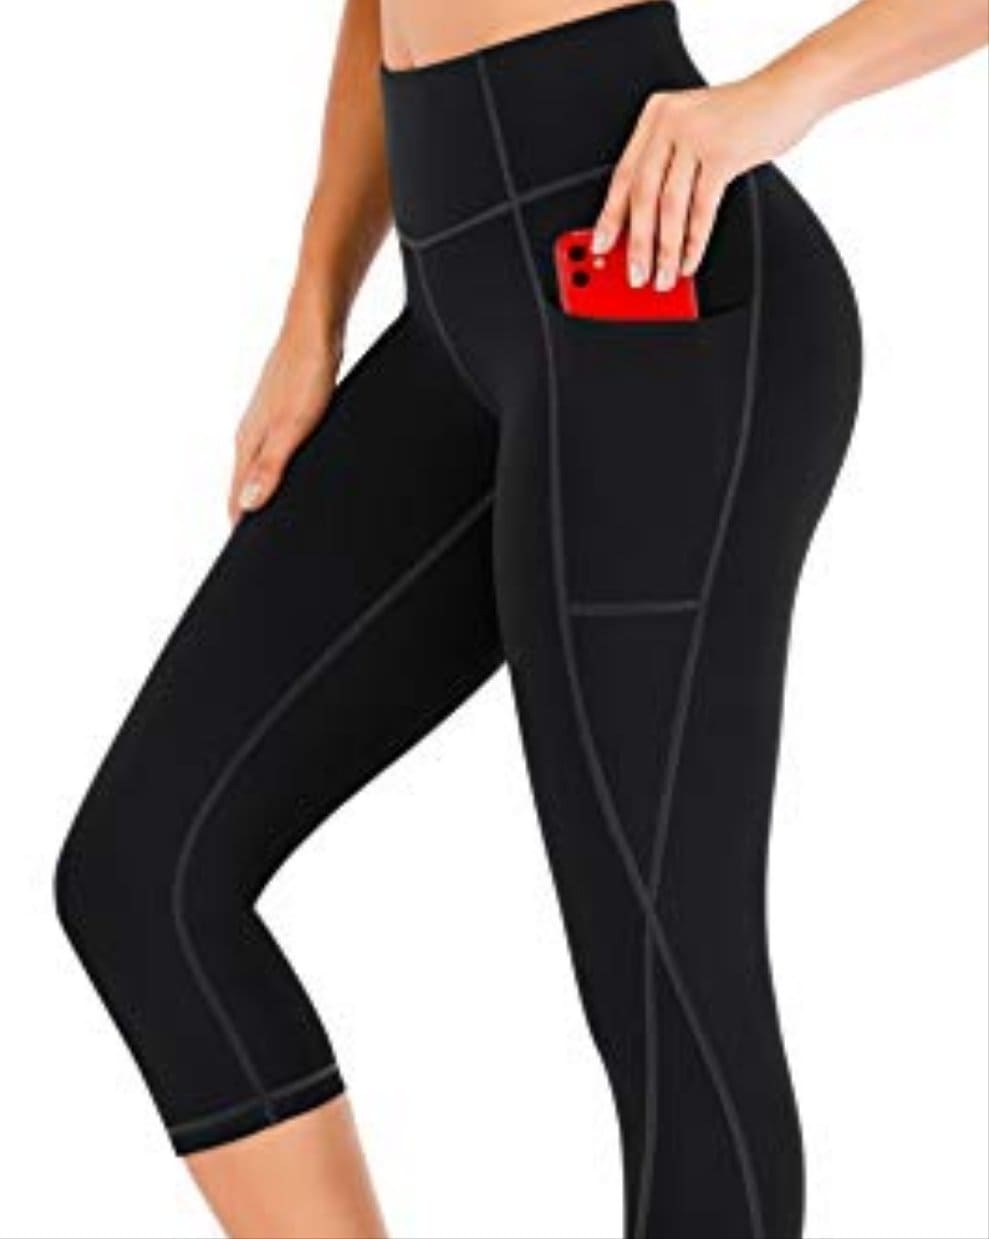 Heathyoga Yoga Pants with Pockets for Women Capri Leggings for Women Yoga Leggings with Pockets for Women High Waisted